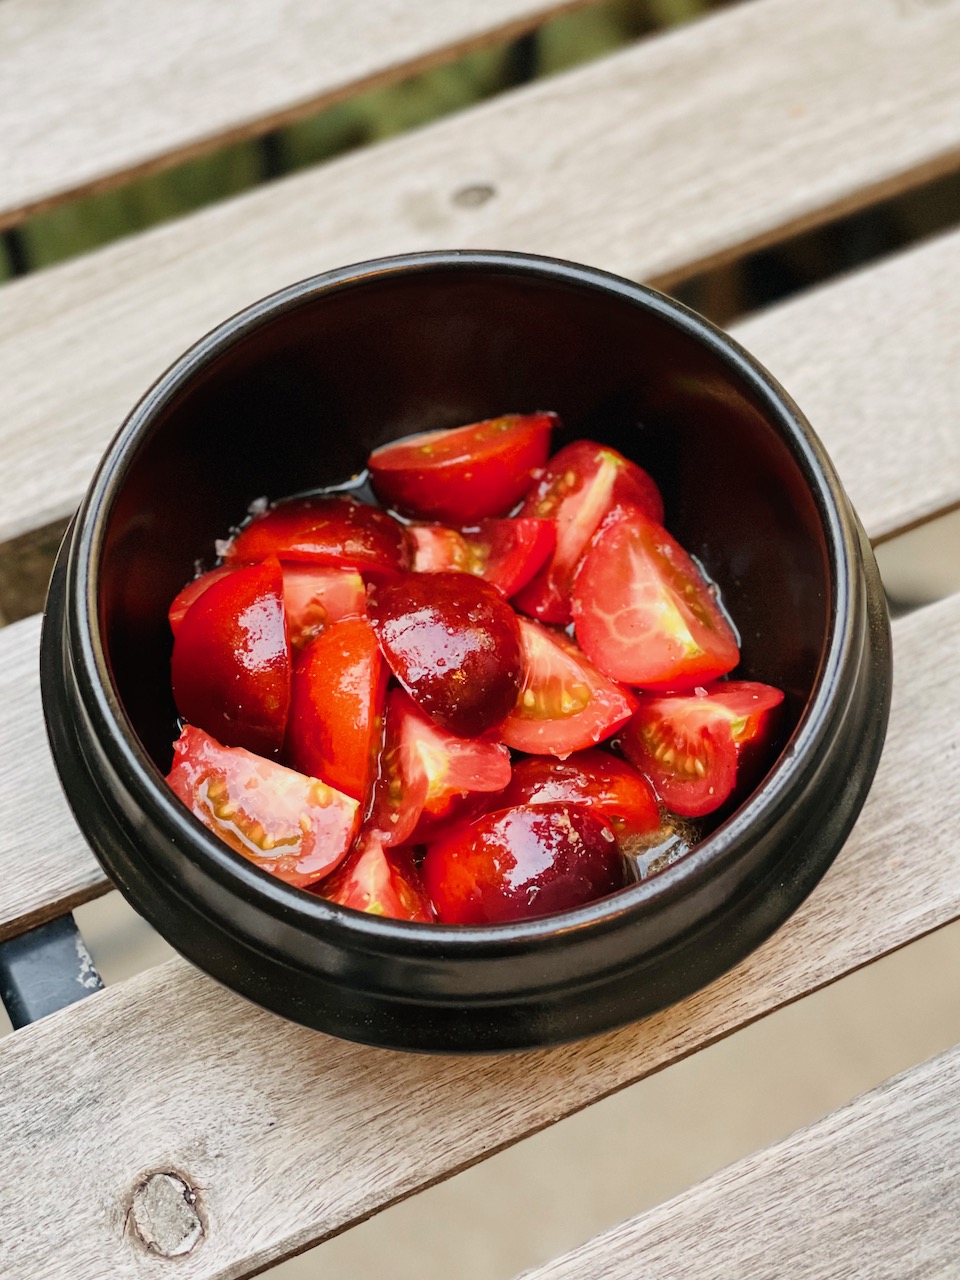 Photo of a dark bowl containing cut tomatoes made very glossy by olive oil.